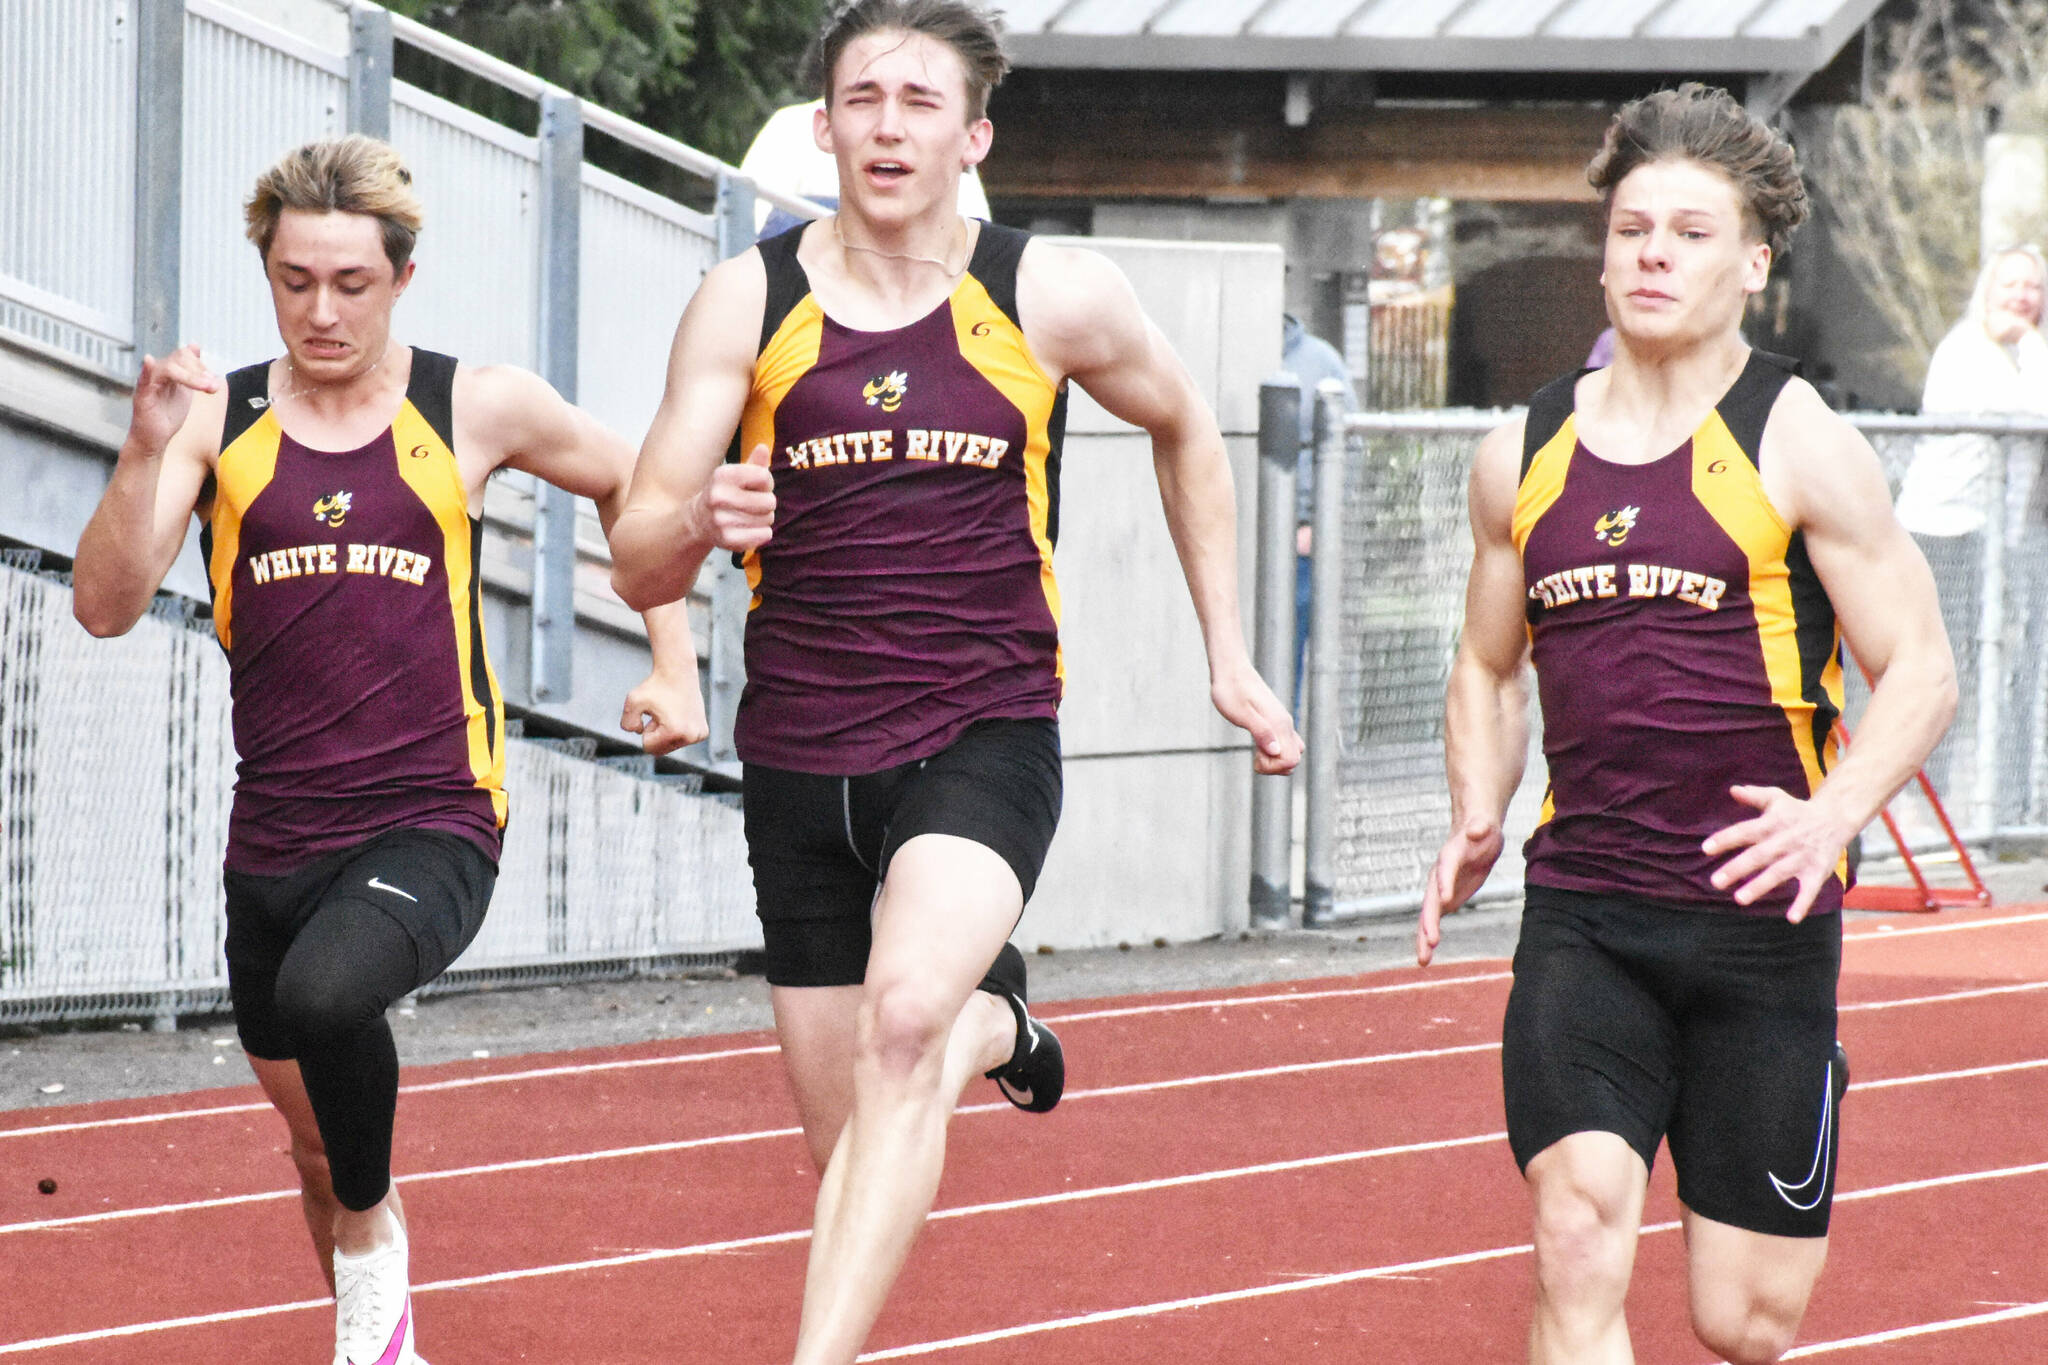 White River’s track and field athletes raced to easy team victories the afternoon of April 10, swamping the visitors from Foss High. In these photos, a boys’ race featured (from left) Hunter Maris, Tyce Donovan and Tate Bowen. Photo by Kevin Hanson